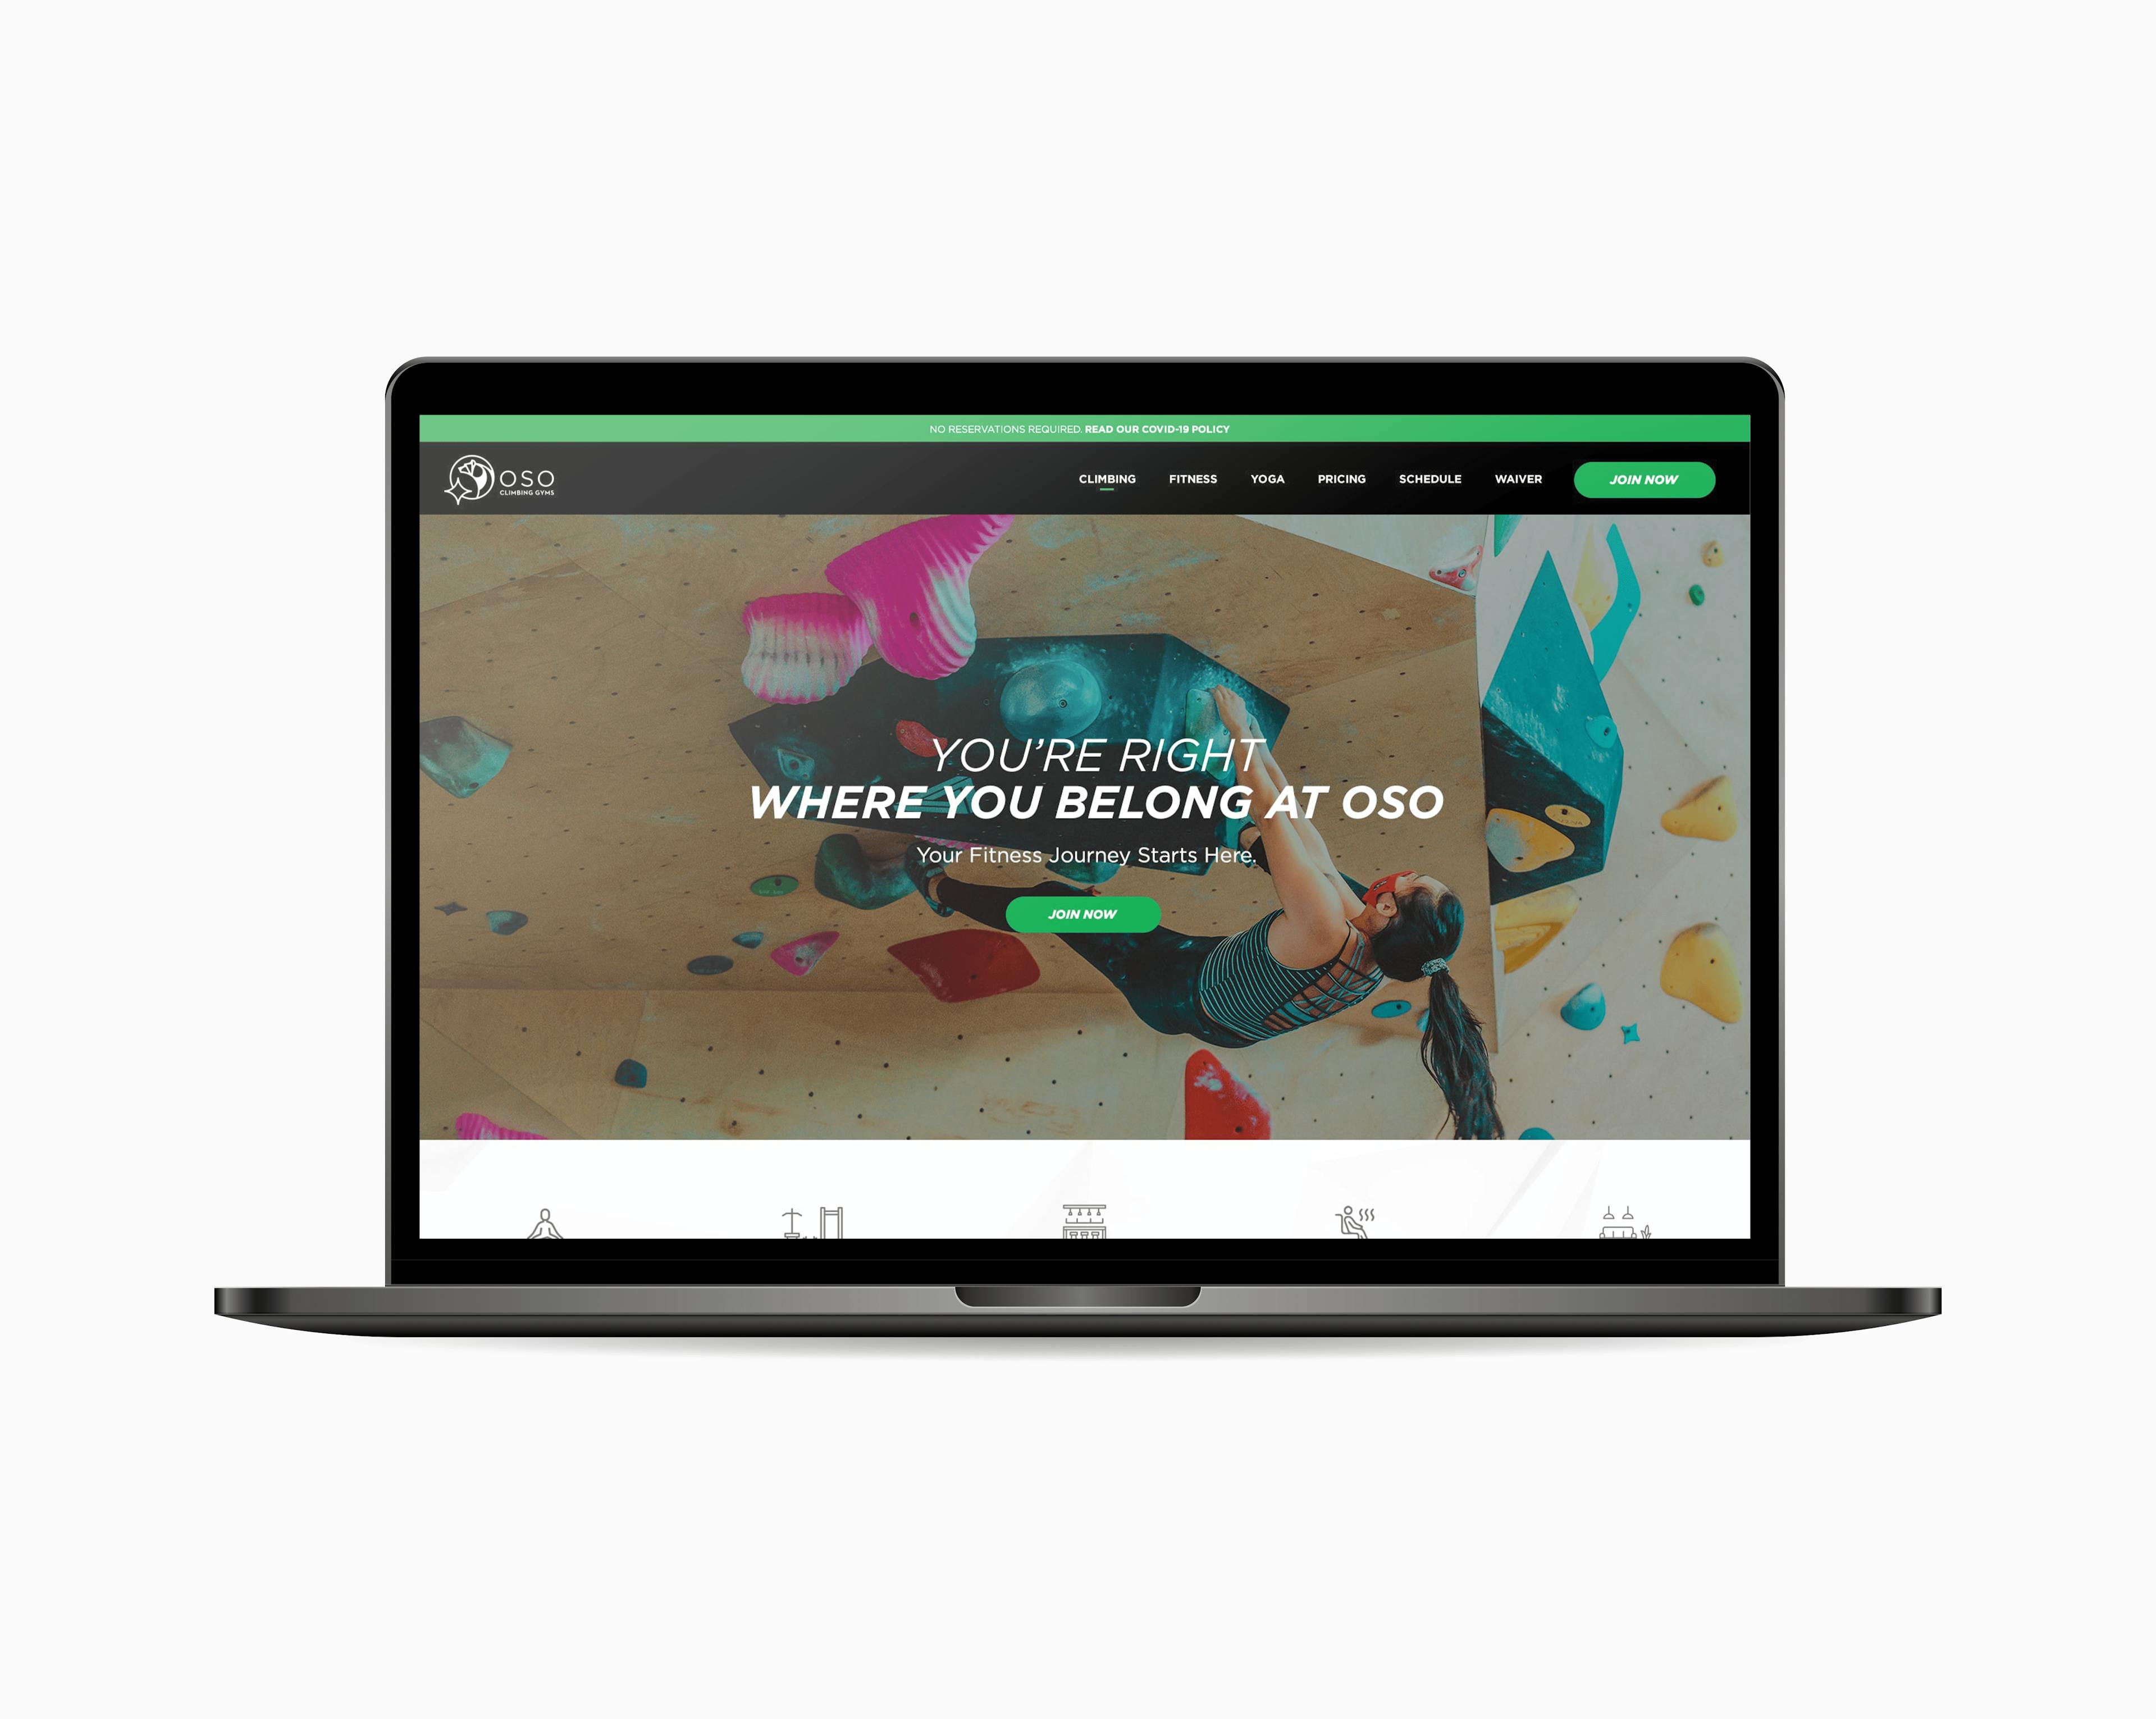 oso climbing gym homepage web design by the utpown agency 